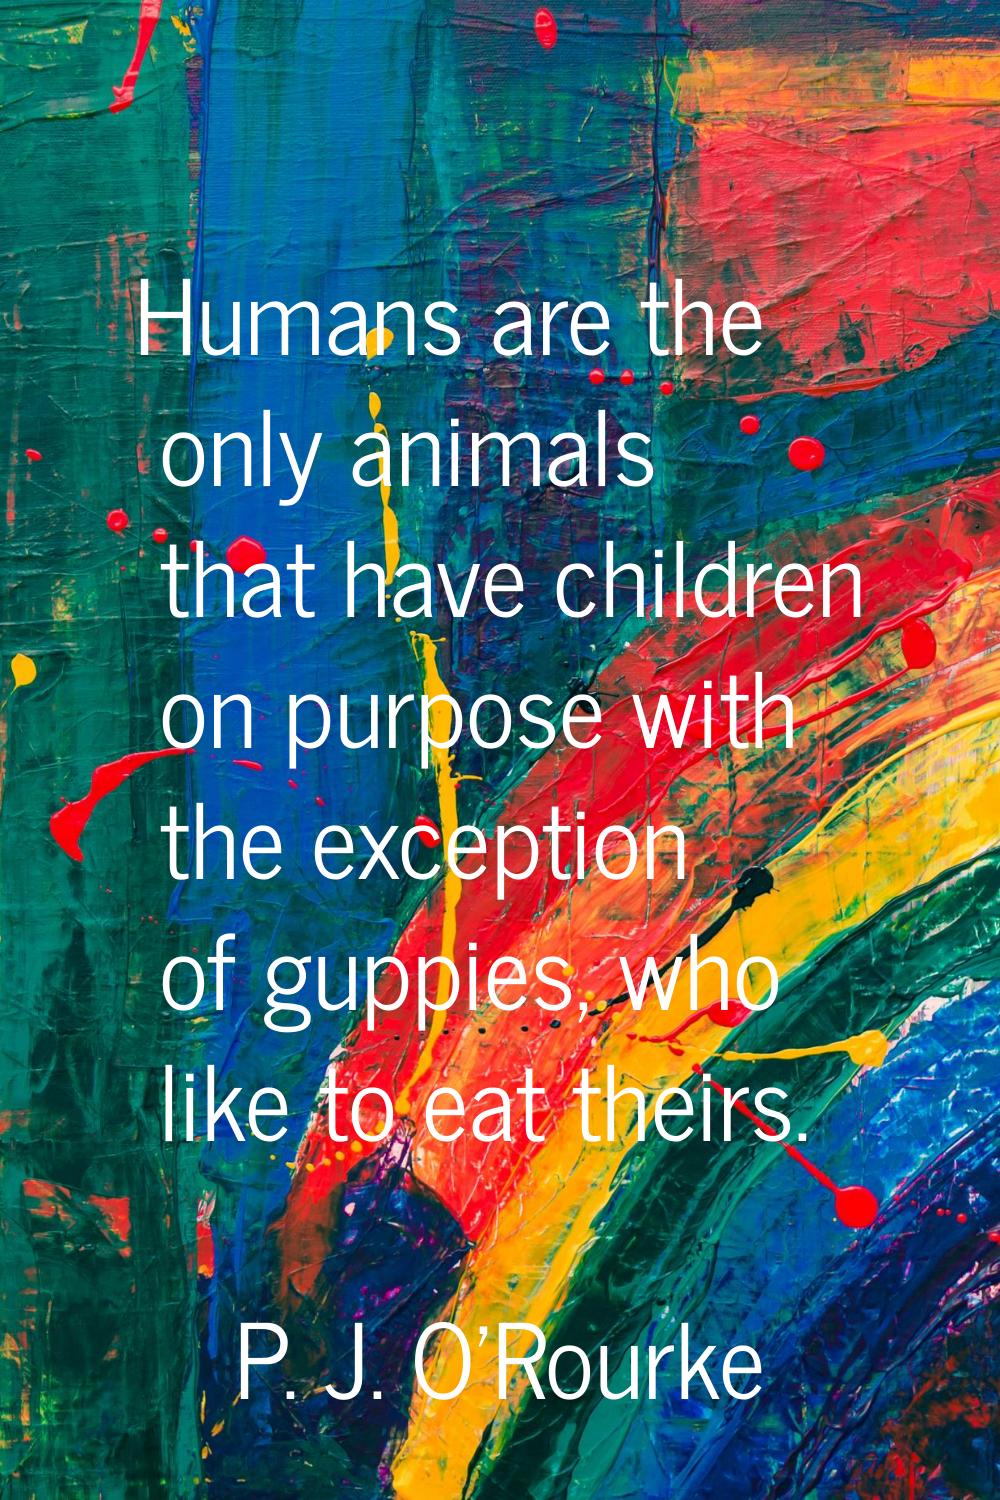 Humans are the only animals that have children on purpose with the exception of guppies, who like t